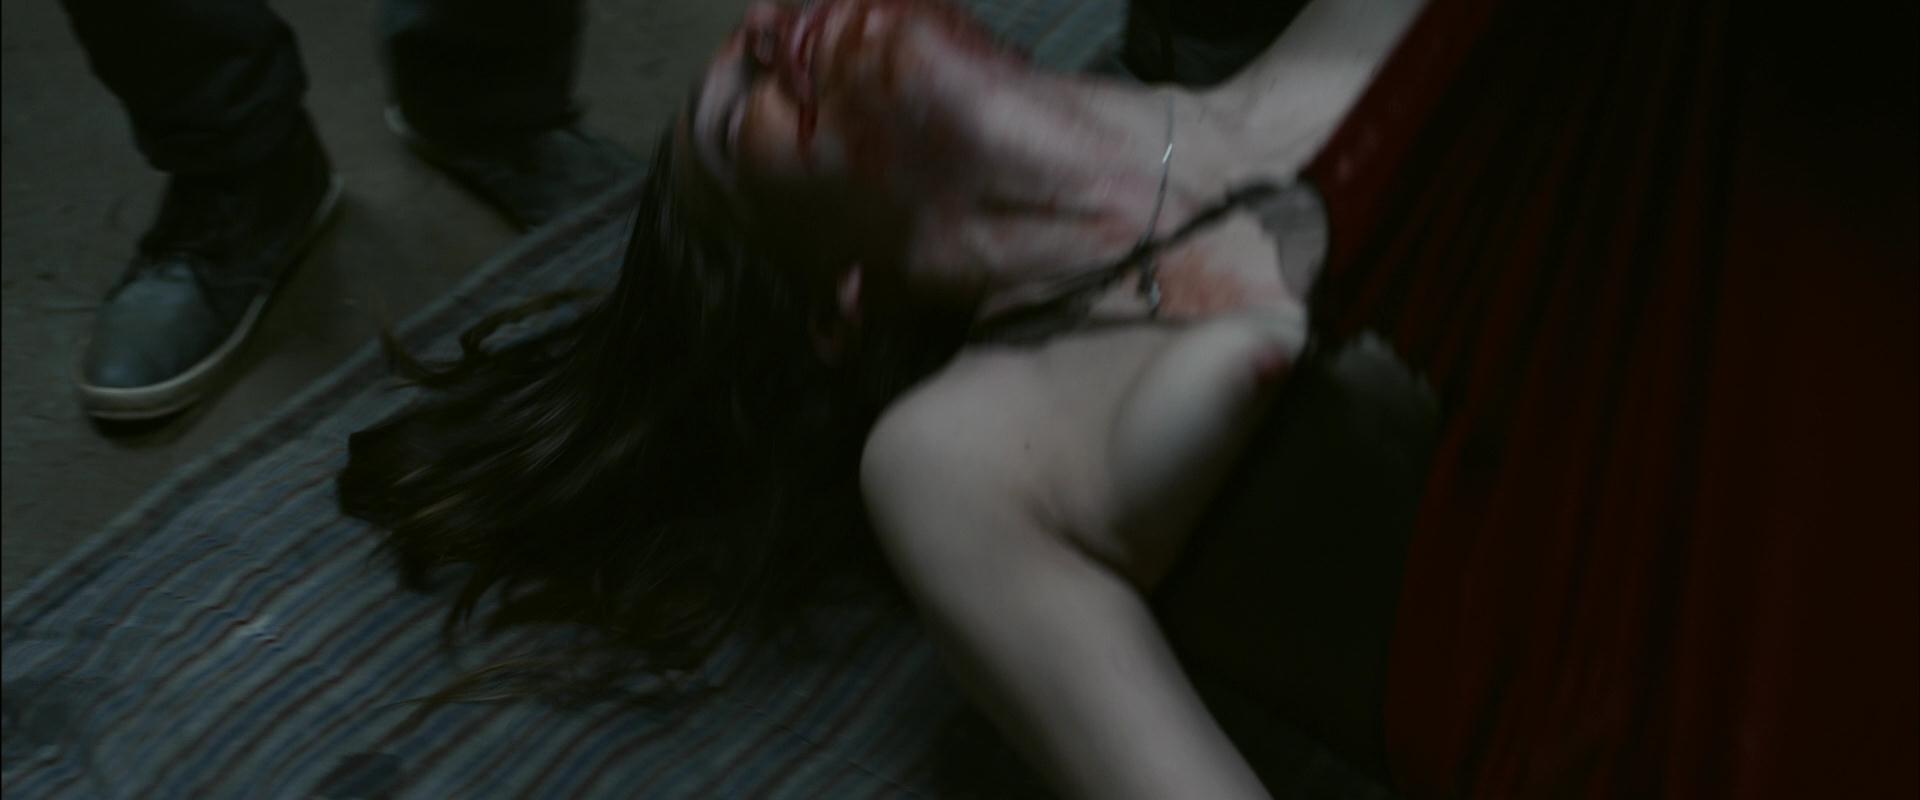 Naked Jemma Dallender In I Spit On Your Grave 2. Alexis Teen Lyanna outdo.....